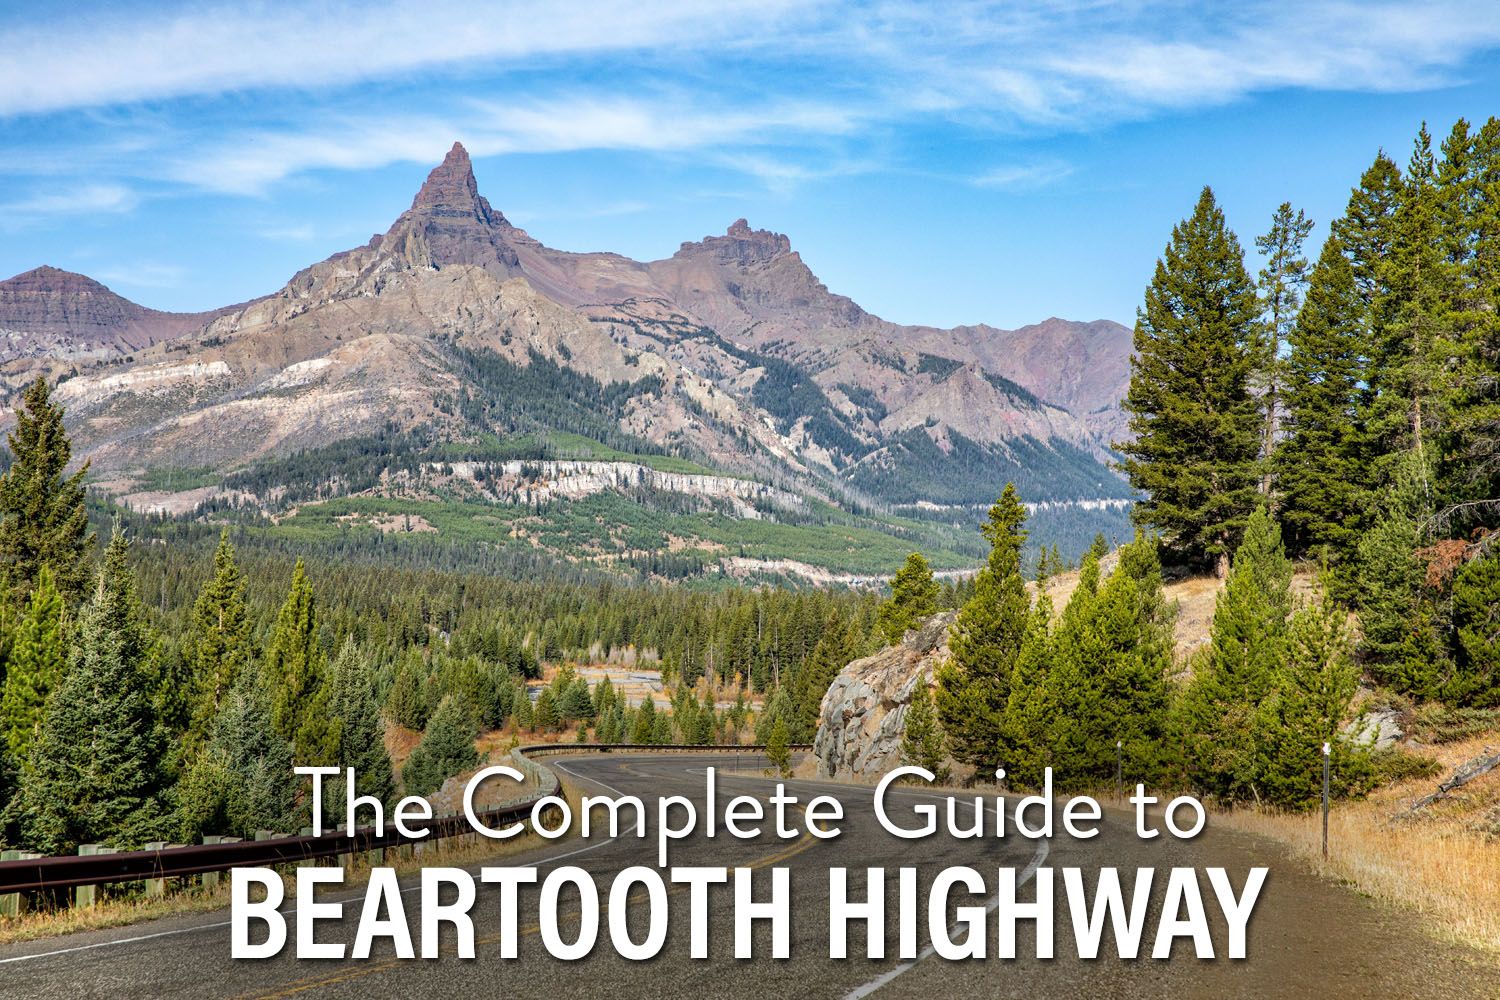 Guide to Beartooth Highway